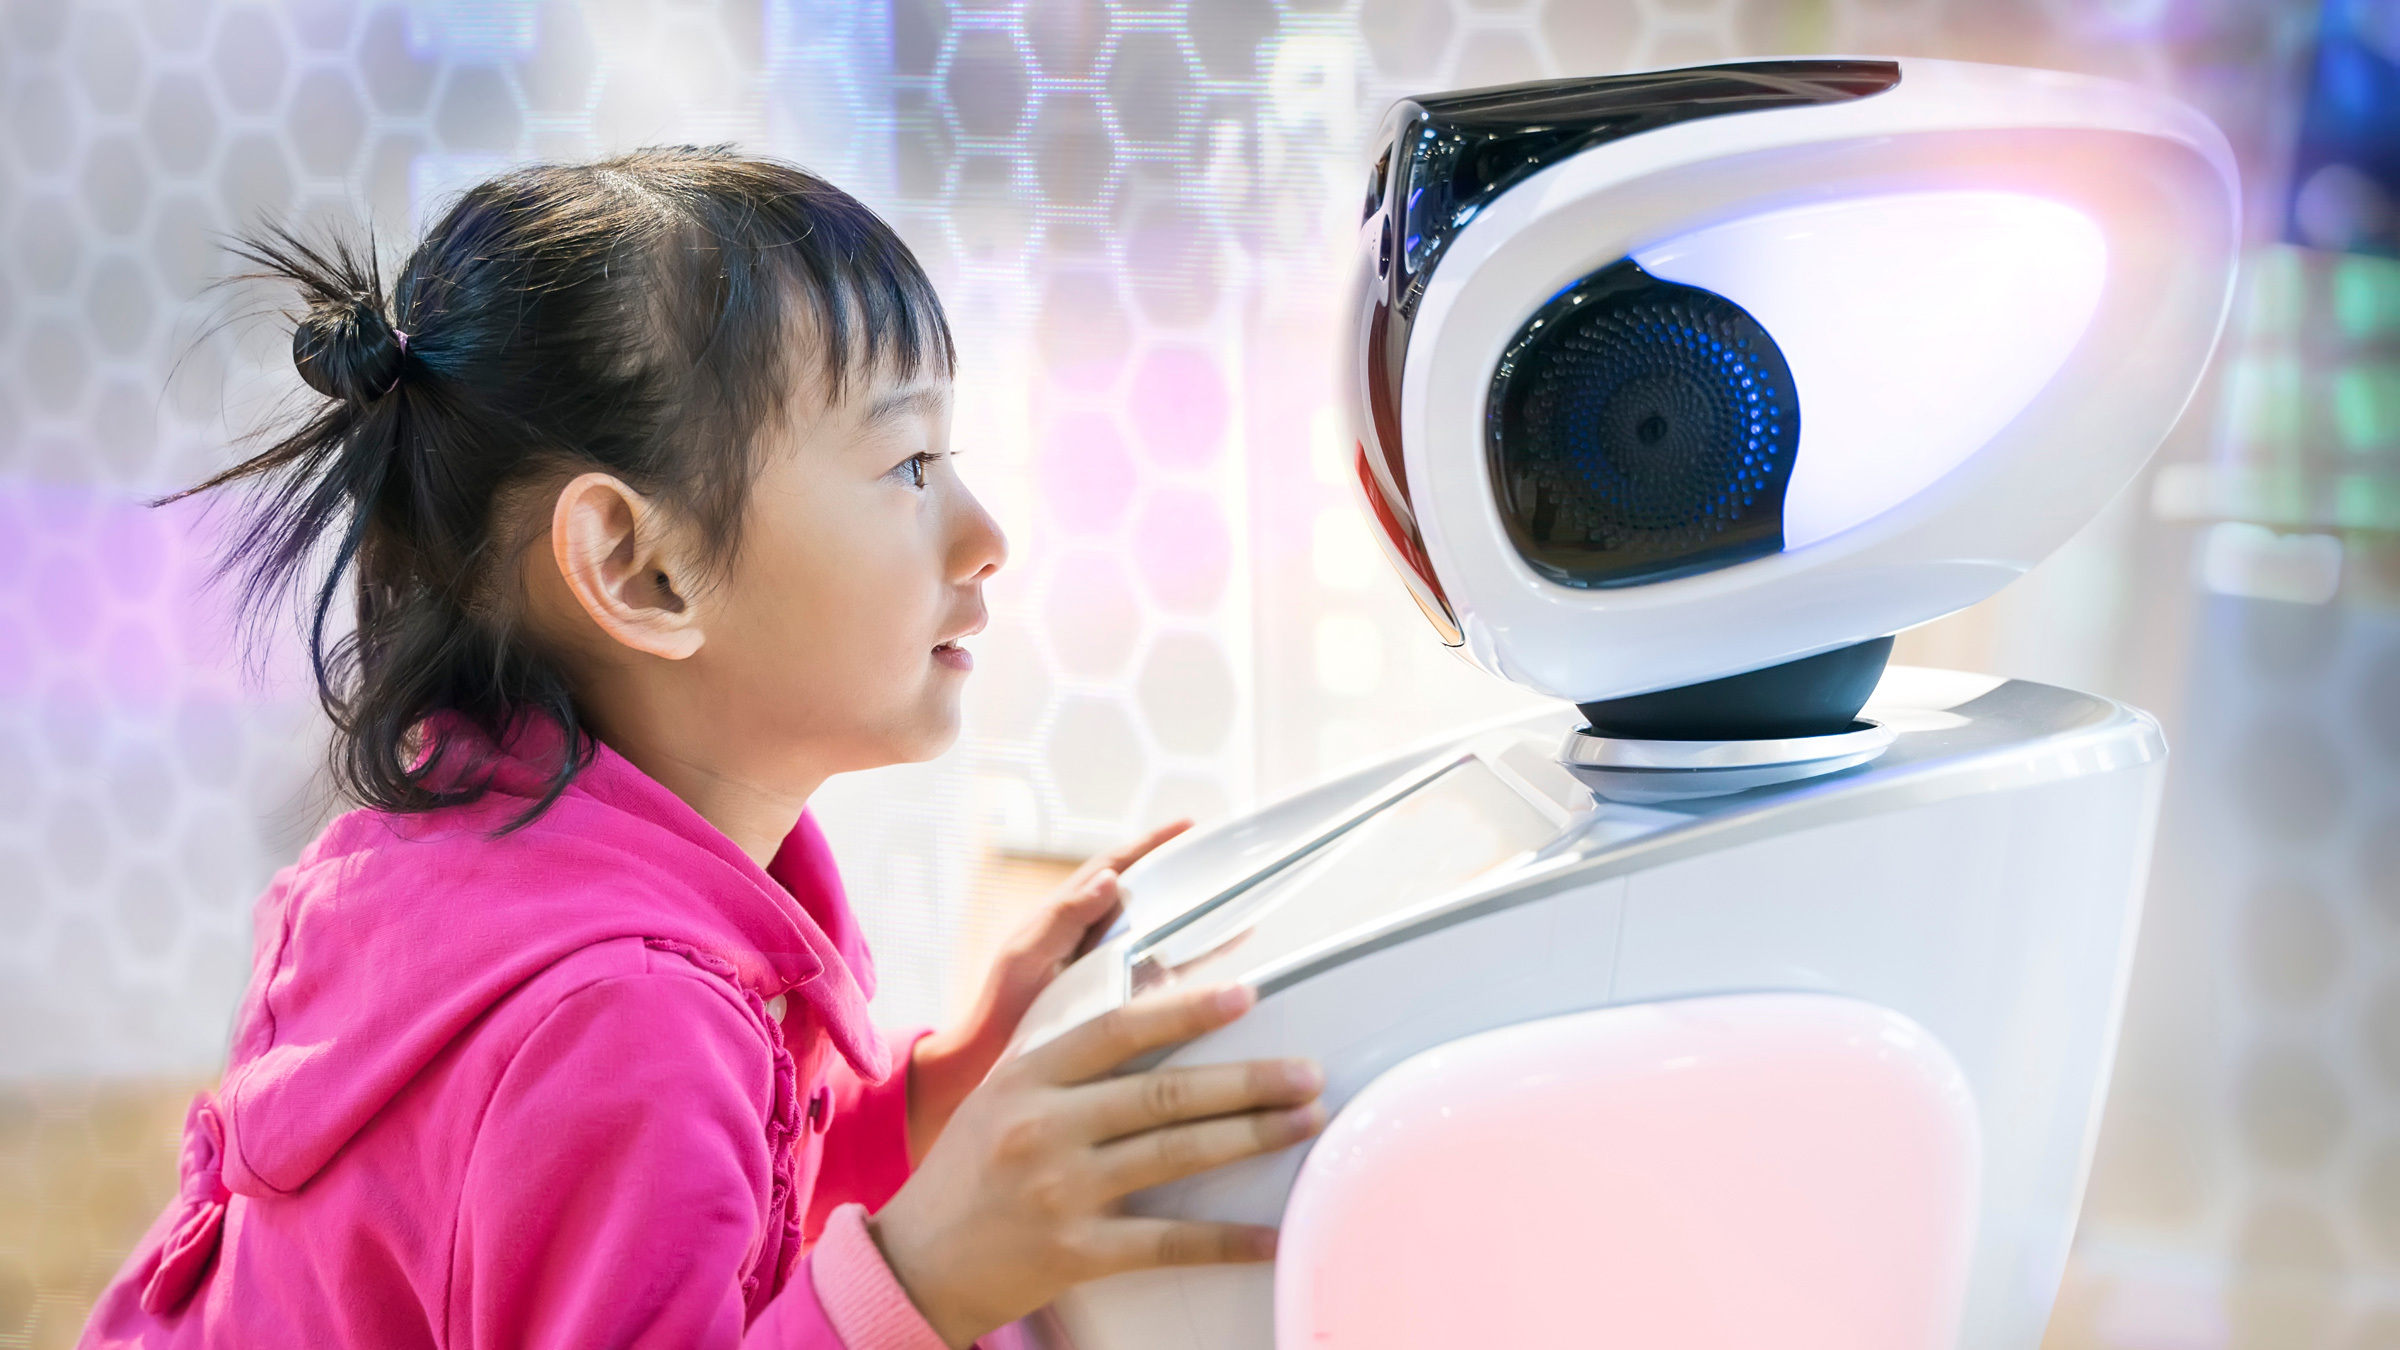 a young girl looks at and leans into the face of a humanoid robot